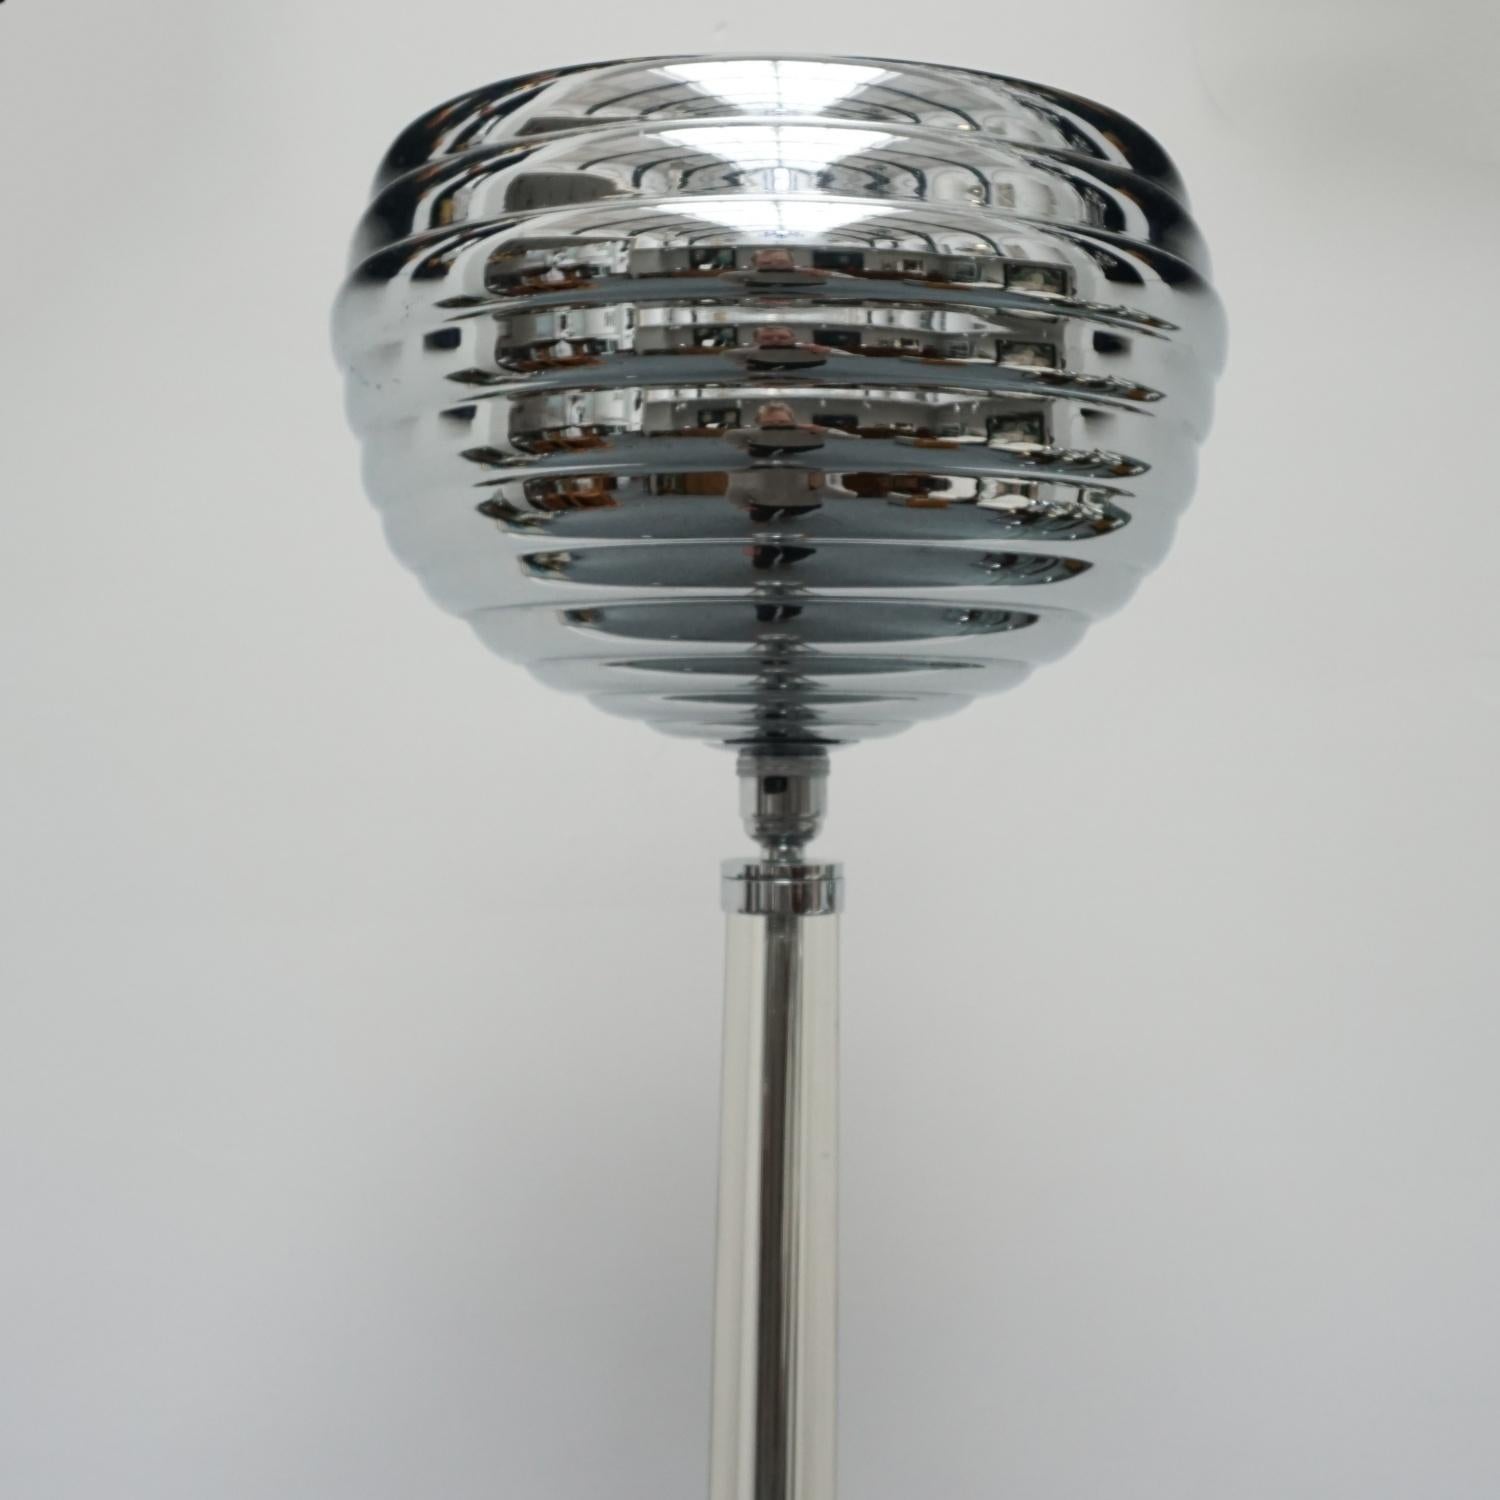 An Art Deco 'Beehive' uplighter floor lamp. Chrome beehive uplighter shade above a due of glass rods stem with chromed metal centre and banding. Set over a solid mahogany and chrome base. 

Dimensions: H 174cm D of shade 28cm D of base